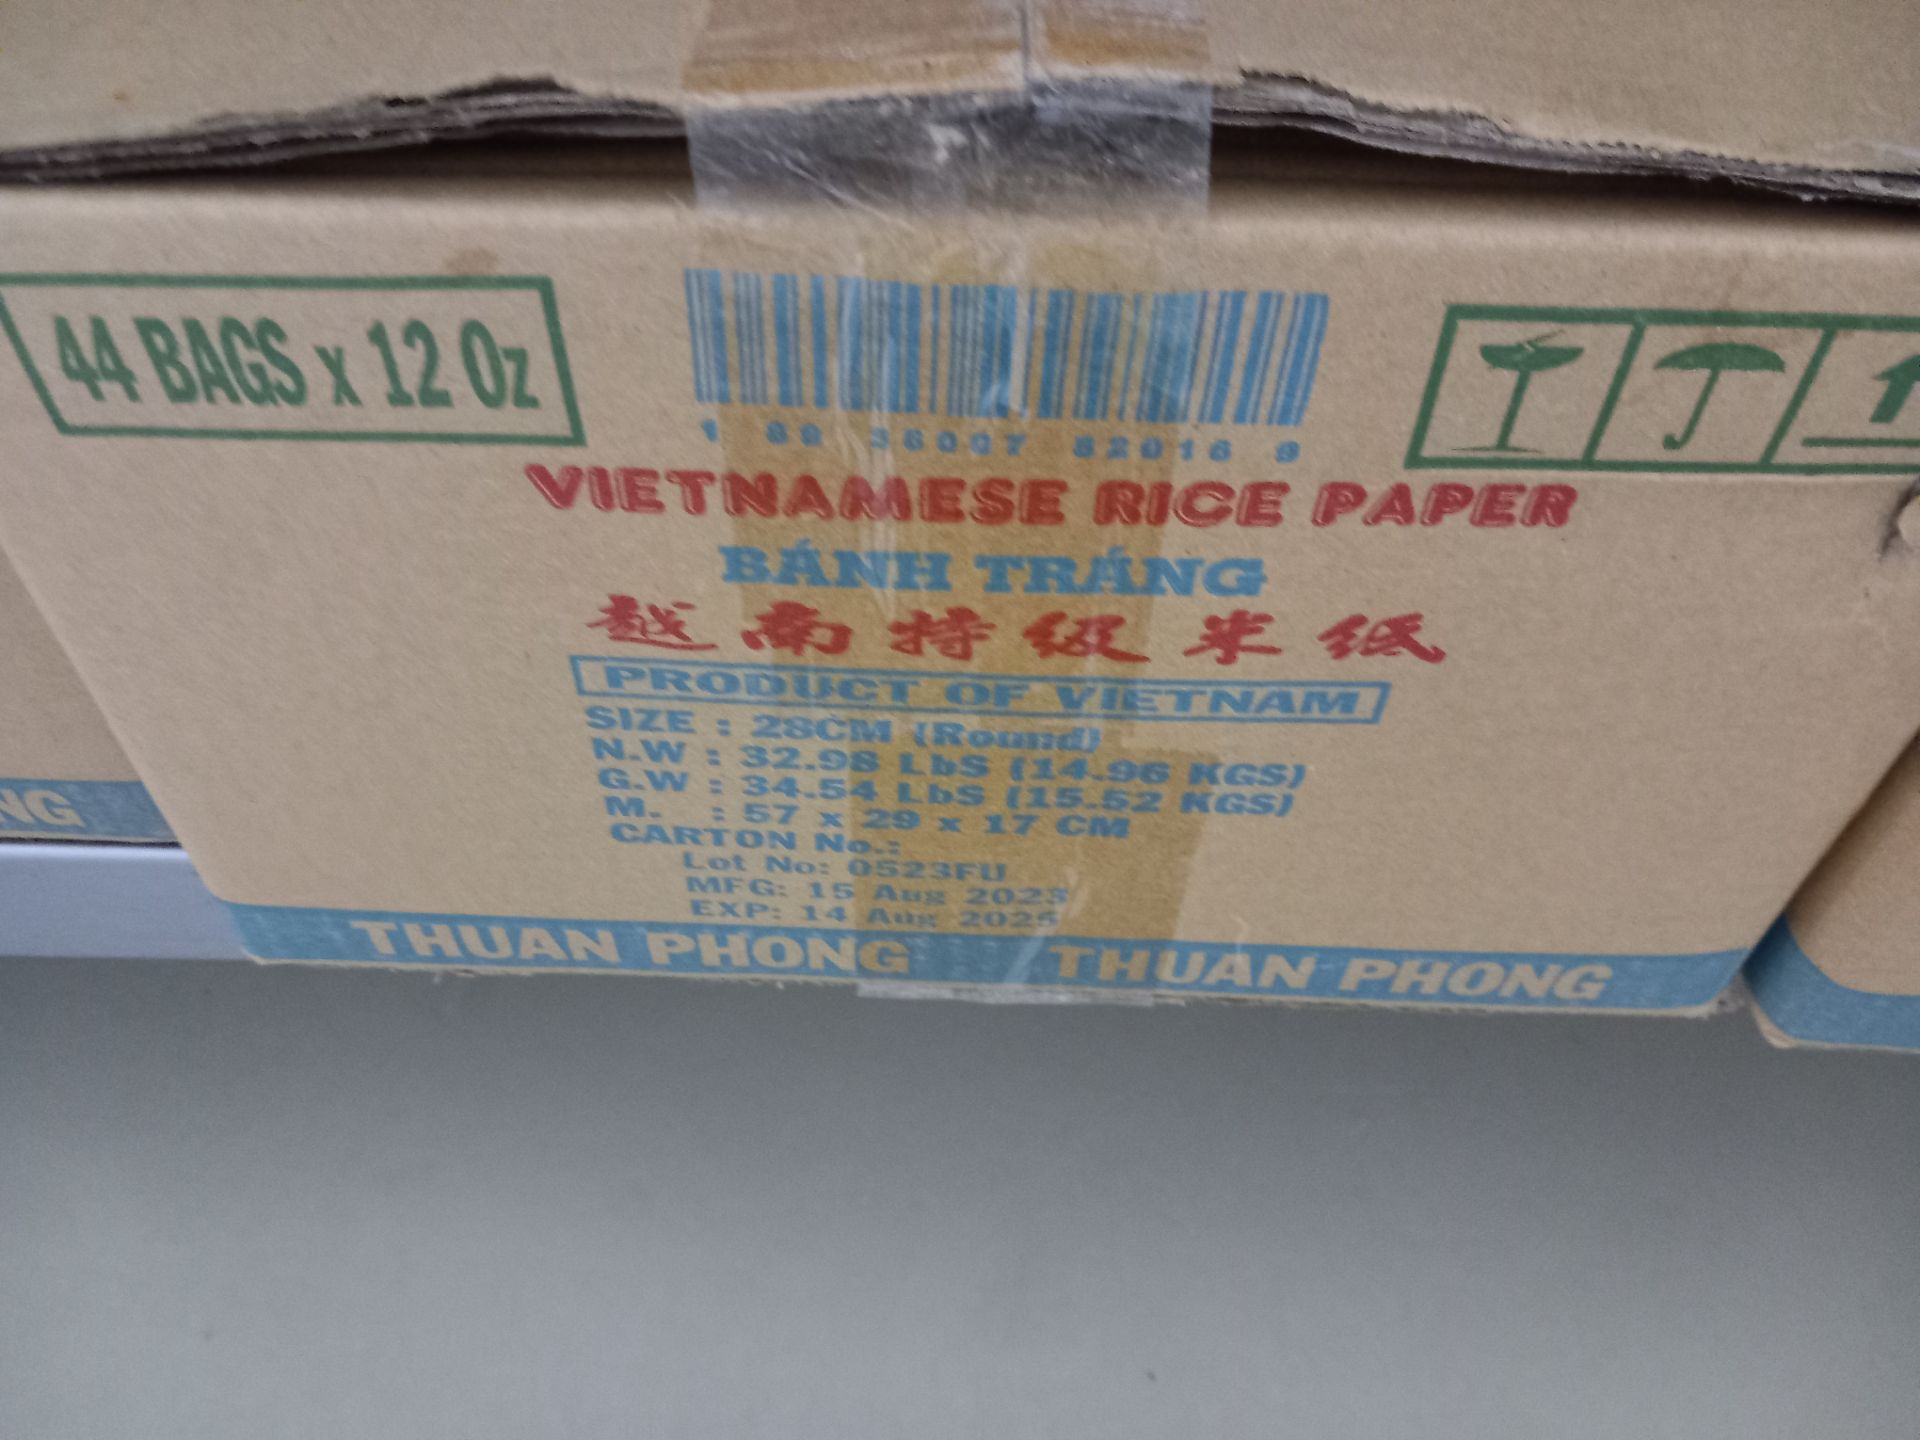 13 boxes x 44 bags x 12oz Vietnamese rice paper - Image 4 of 4